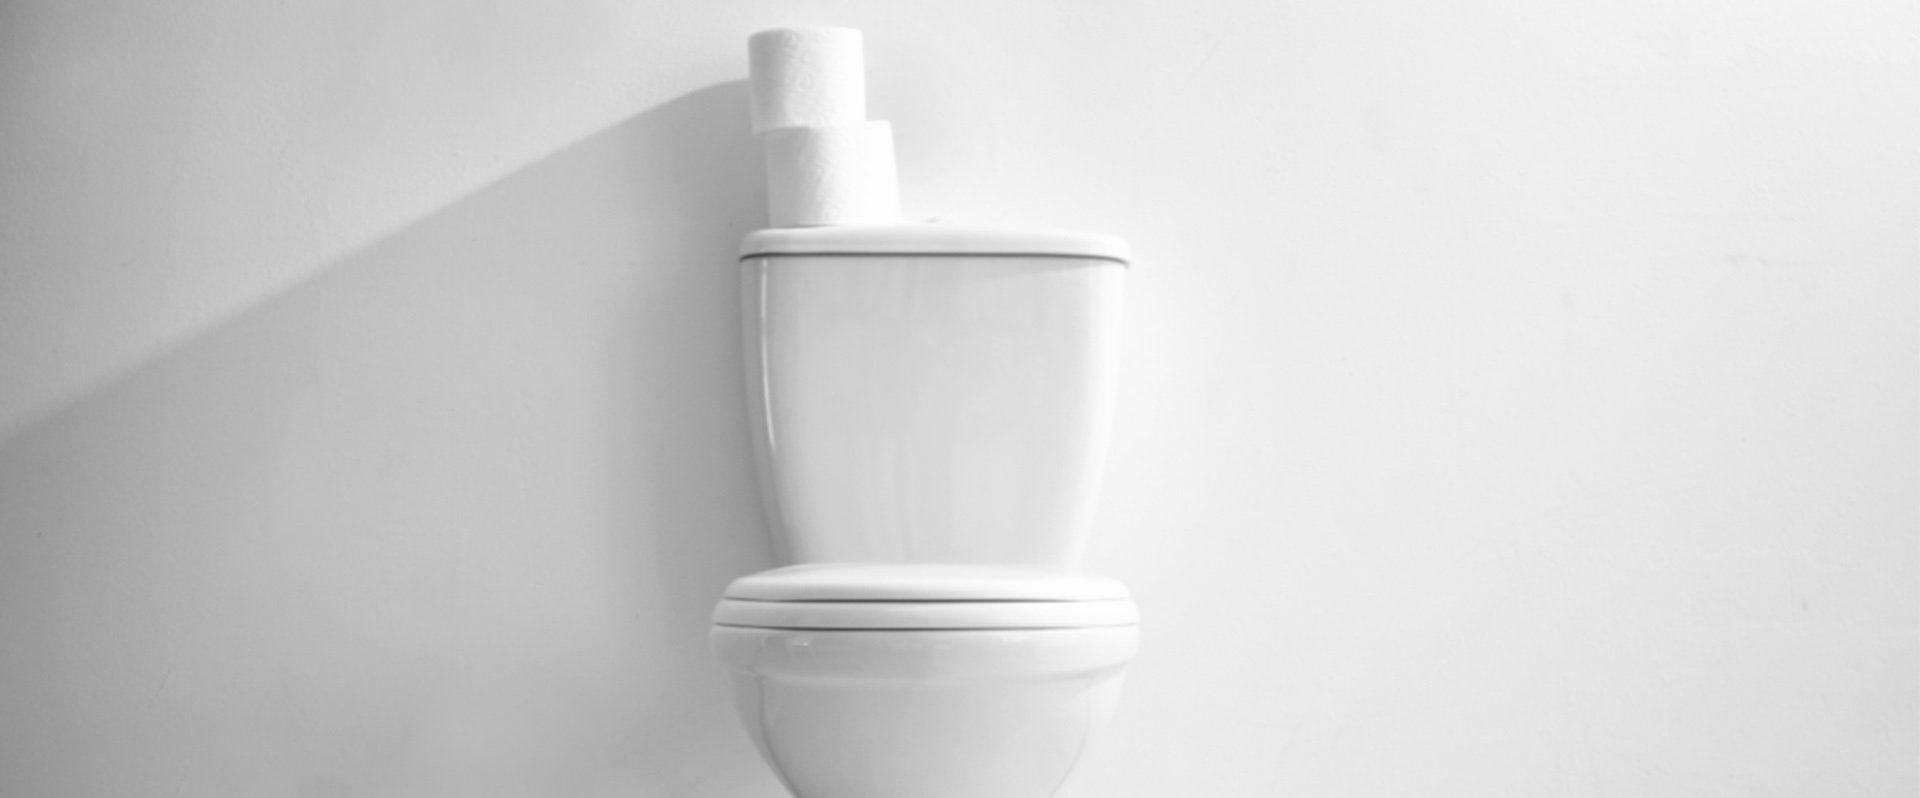 Toilet Talk! Where did it all come from?